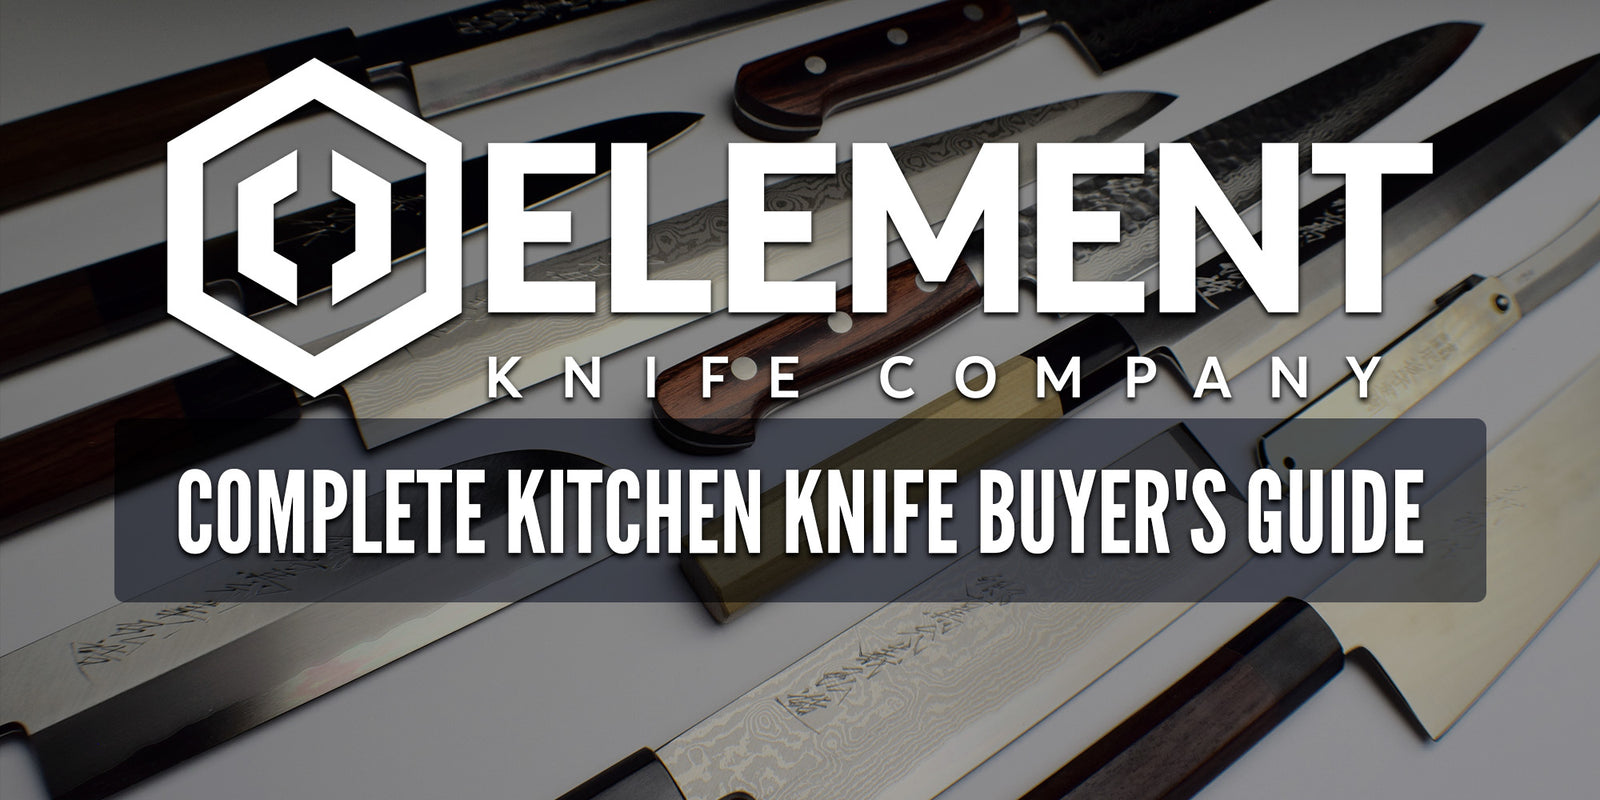 Element Knife Company Complete Kitchen Knife Buyer's Guide